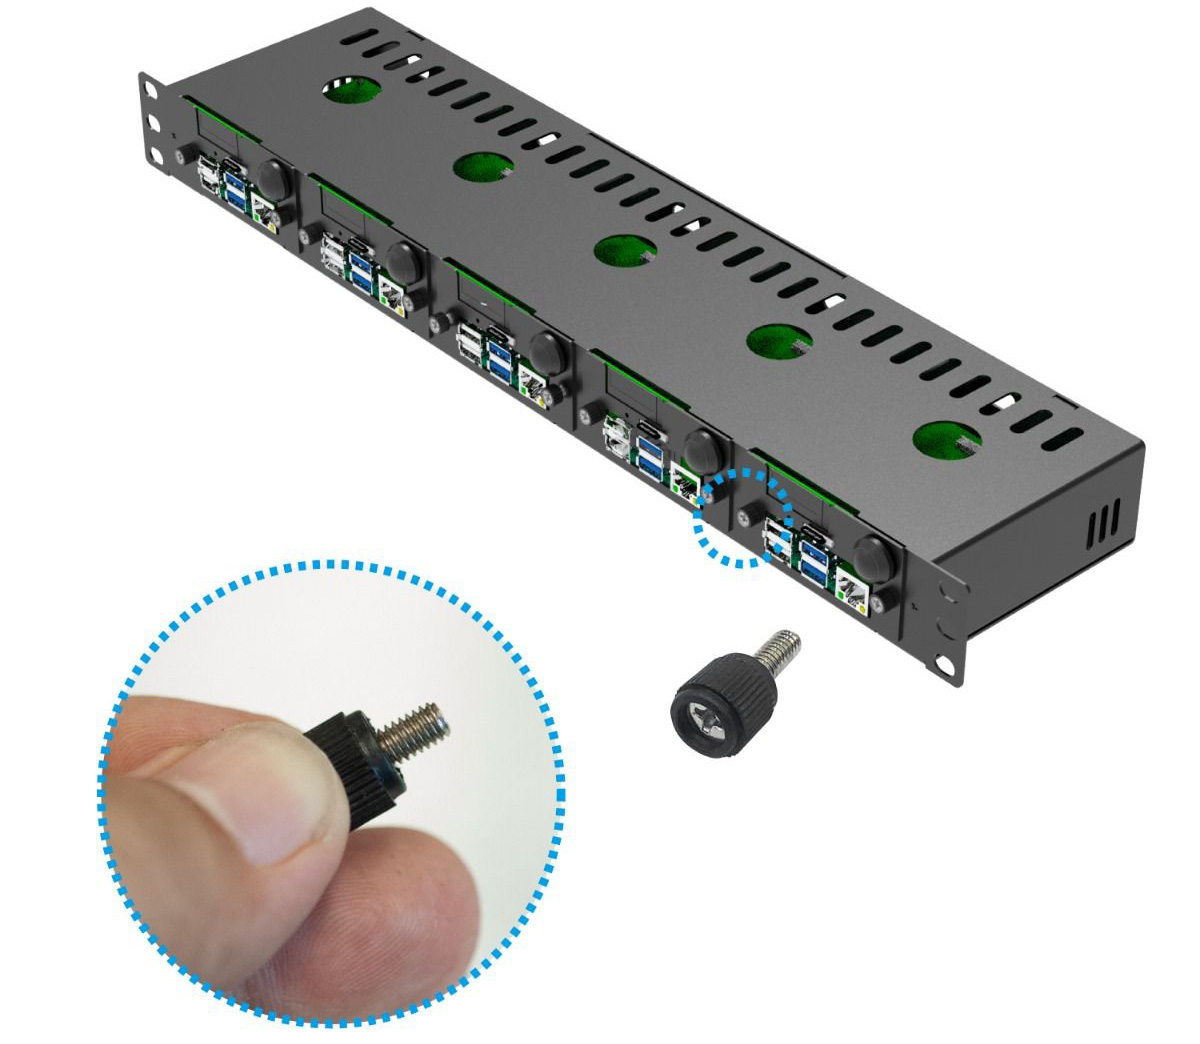 Complete Ultimate Raspberry Pi Rack Mount Enclosure w/ PoE Functionality - Click to Enlarge